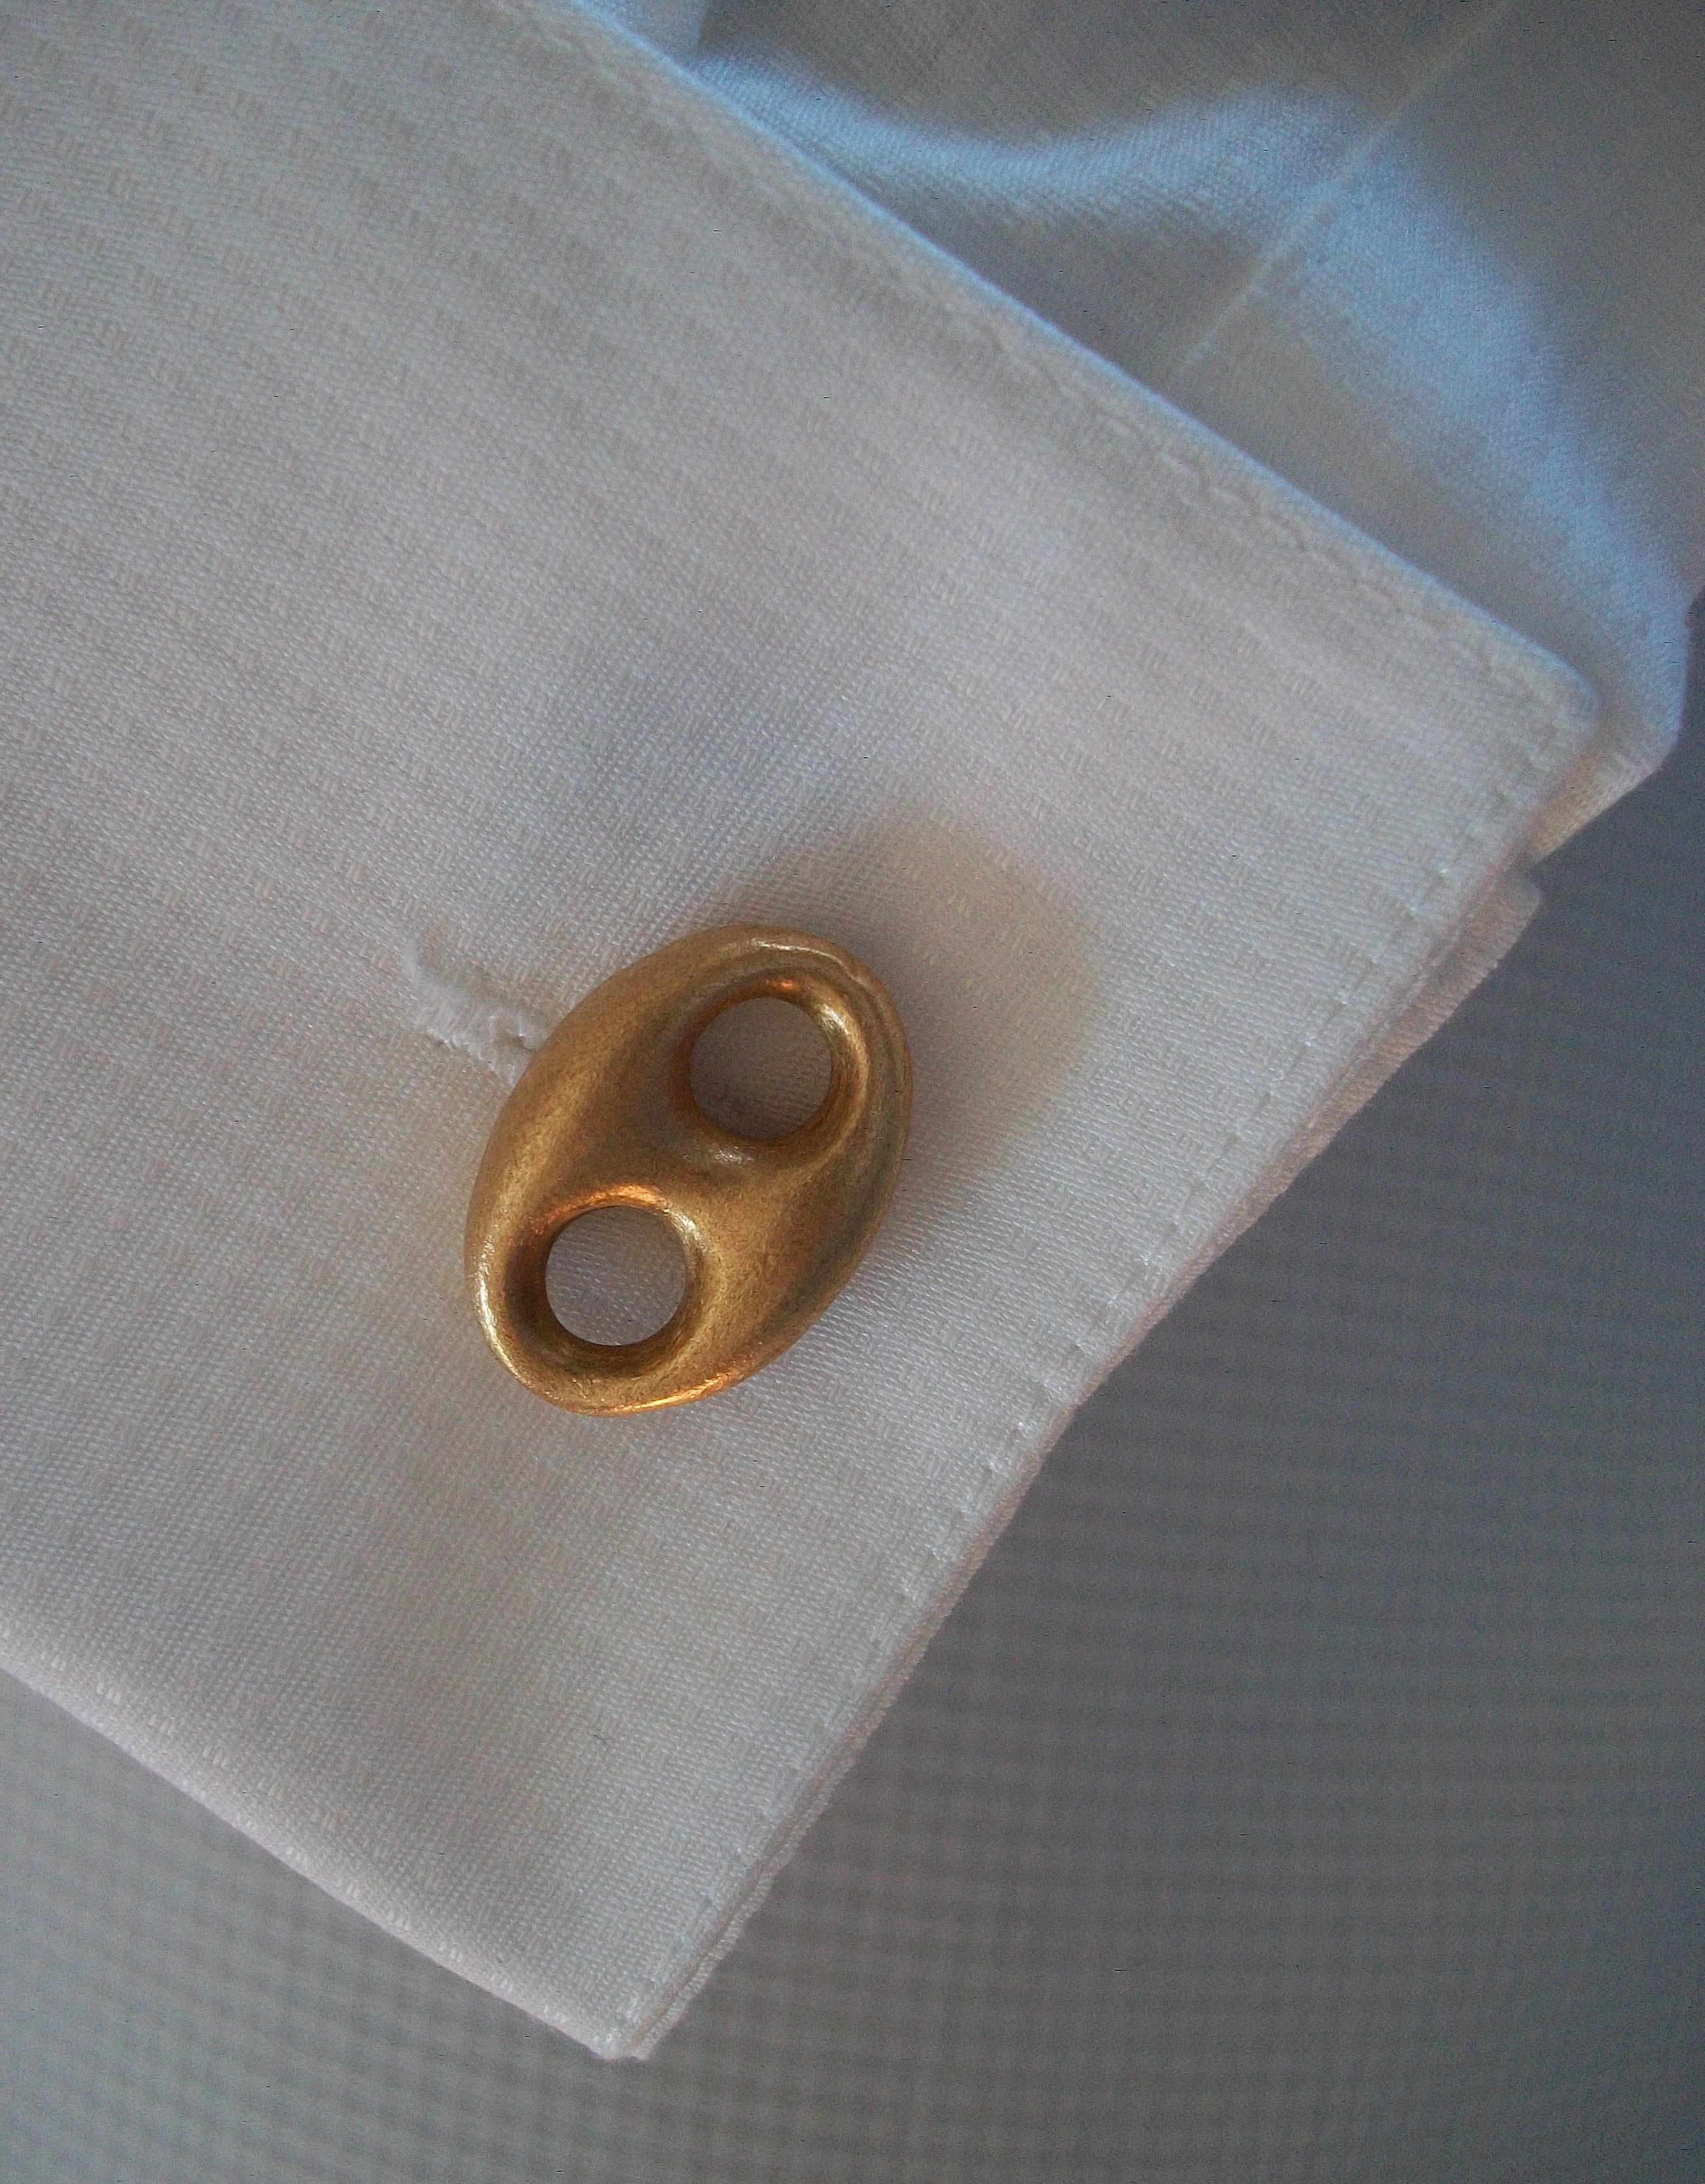 Vintage Mariner Link 18K Gold Cufflinks - Italy (Arezzo) - Mid 20th Century For Sale 2